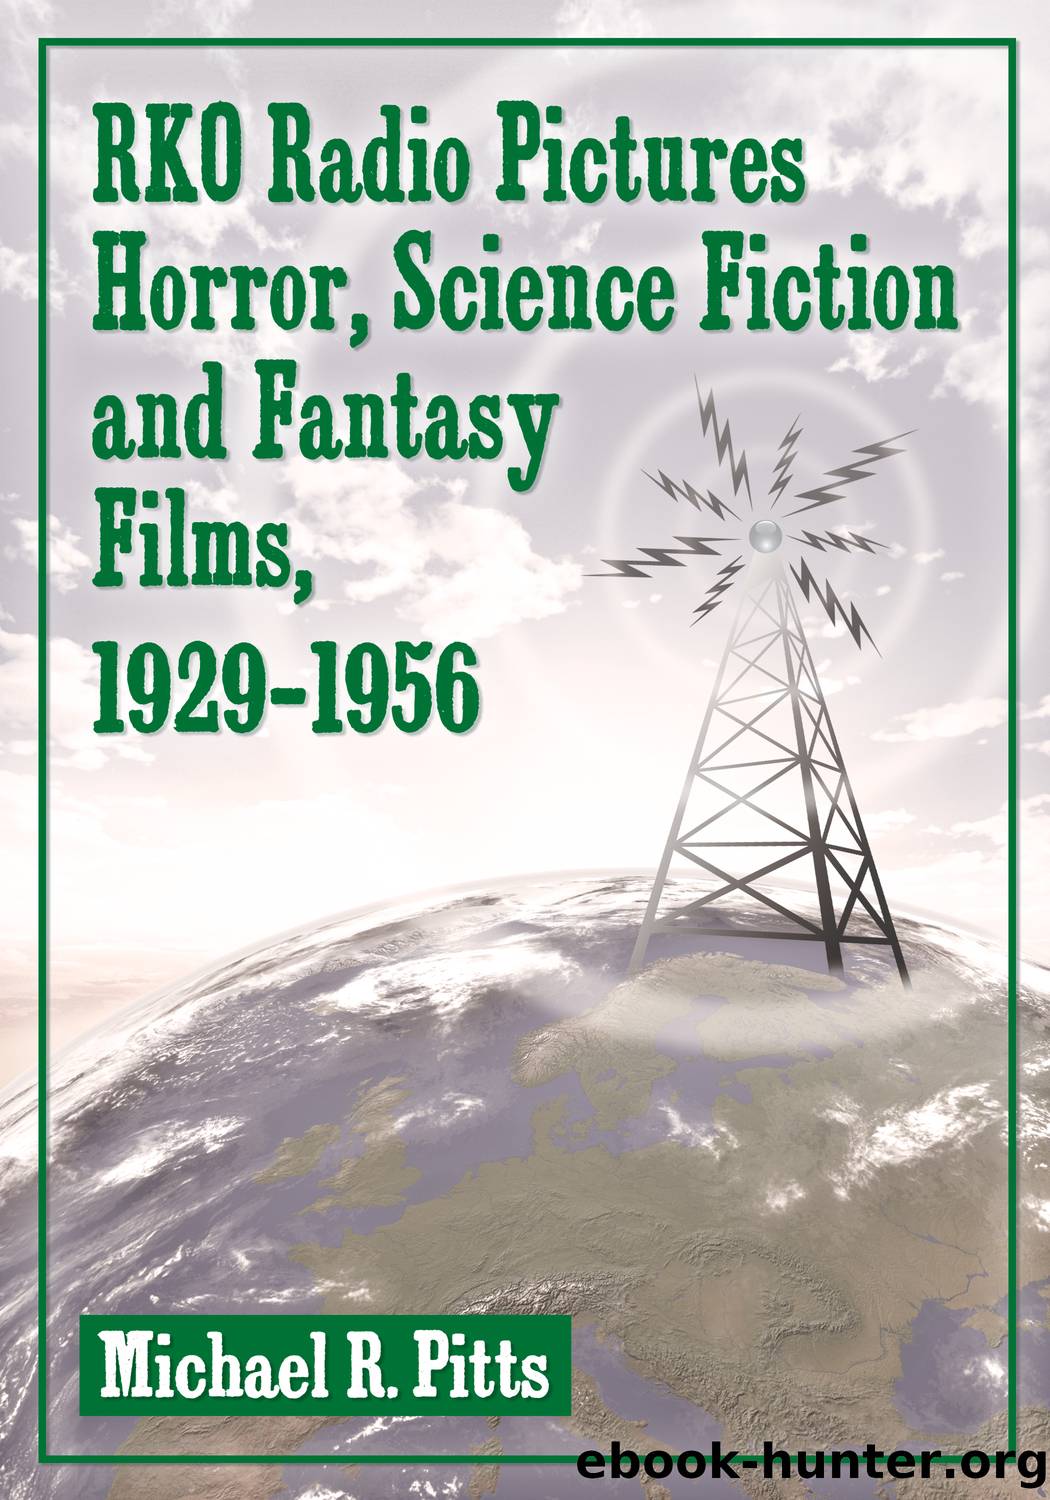 RKO Radio Pictures Horror, Science Fiction and Fantasy Films, 1929-1956 by Michael R. Pitts